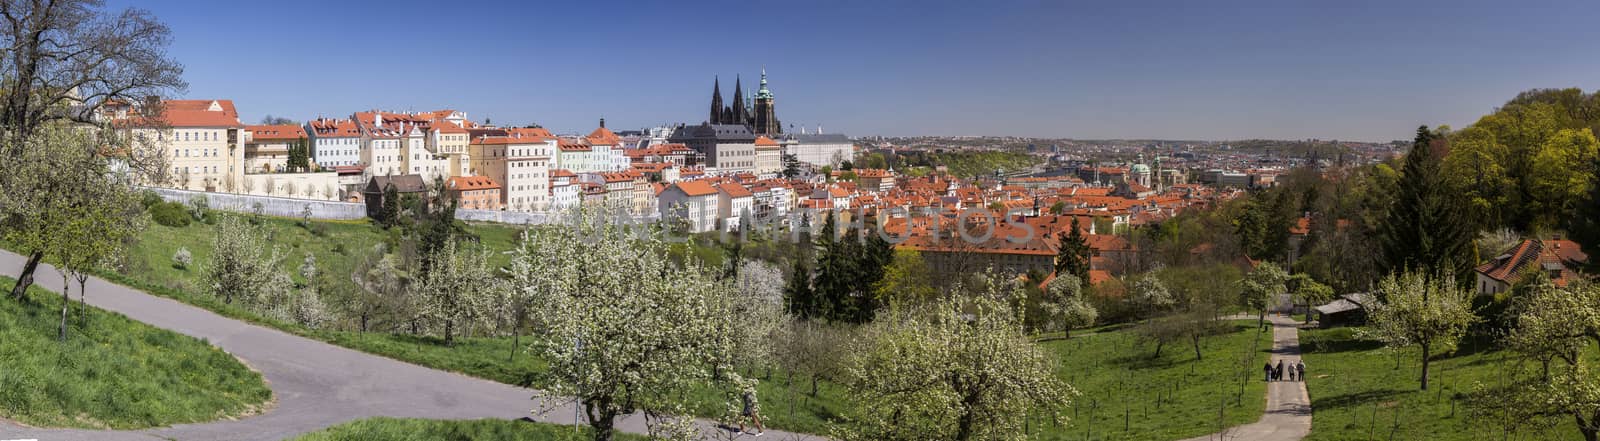 Panorama of Prague from Petrin hill by A-dam